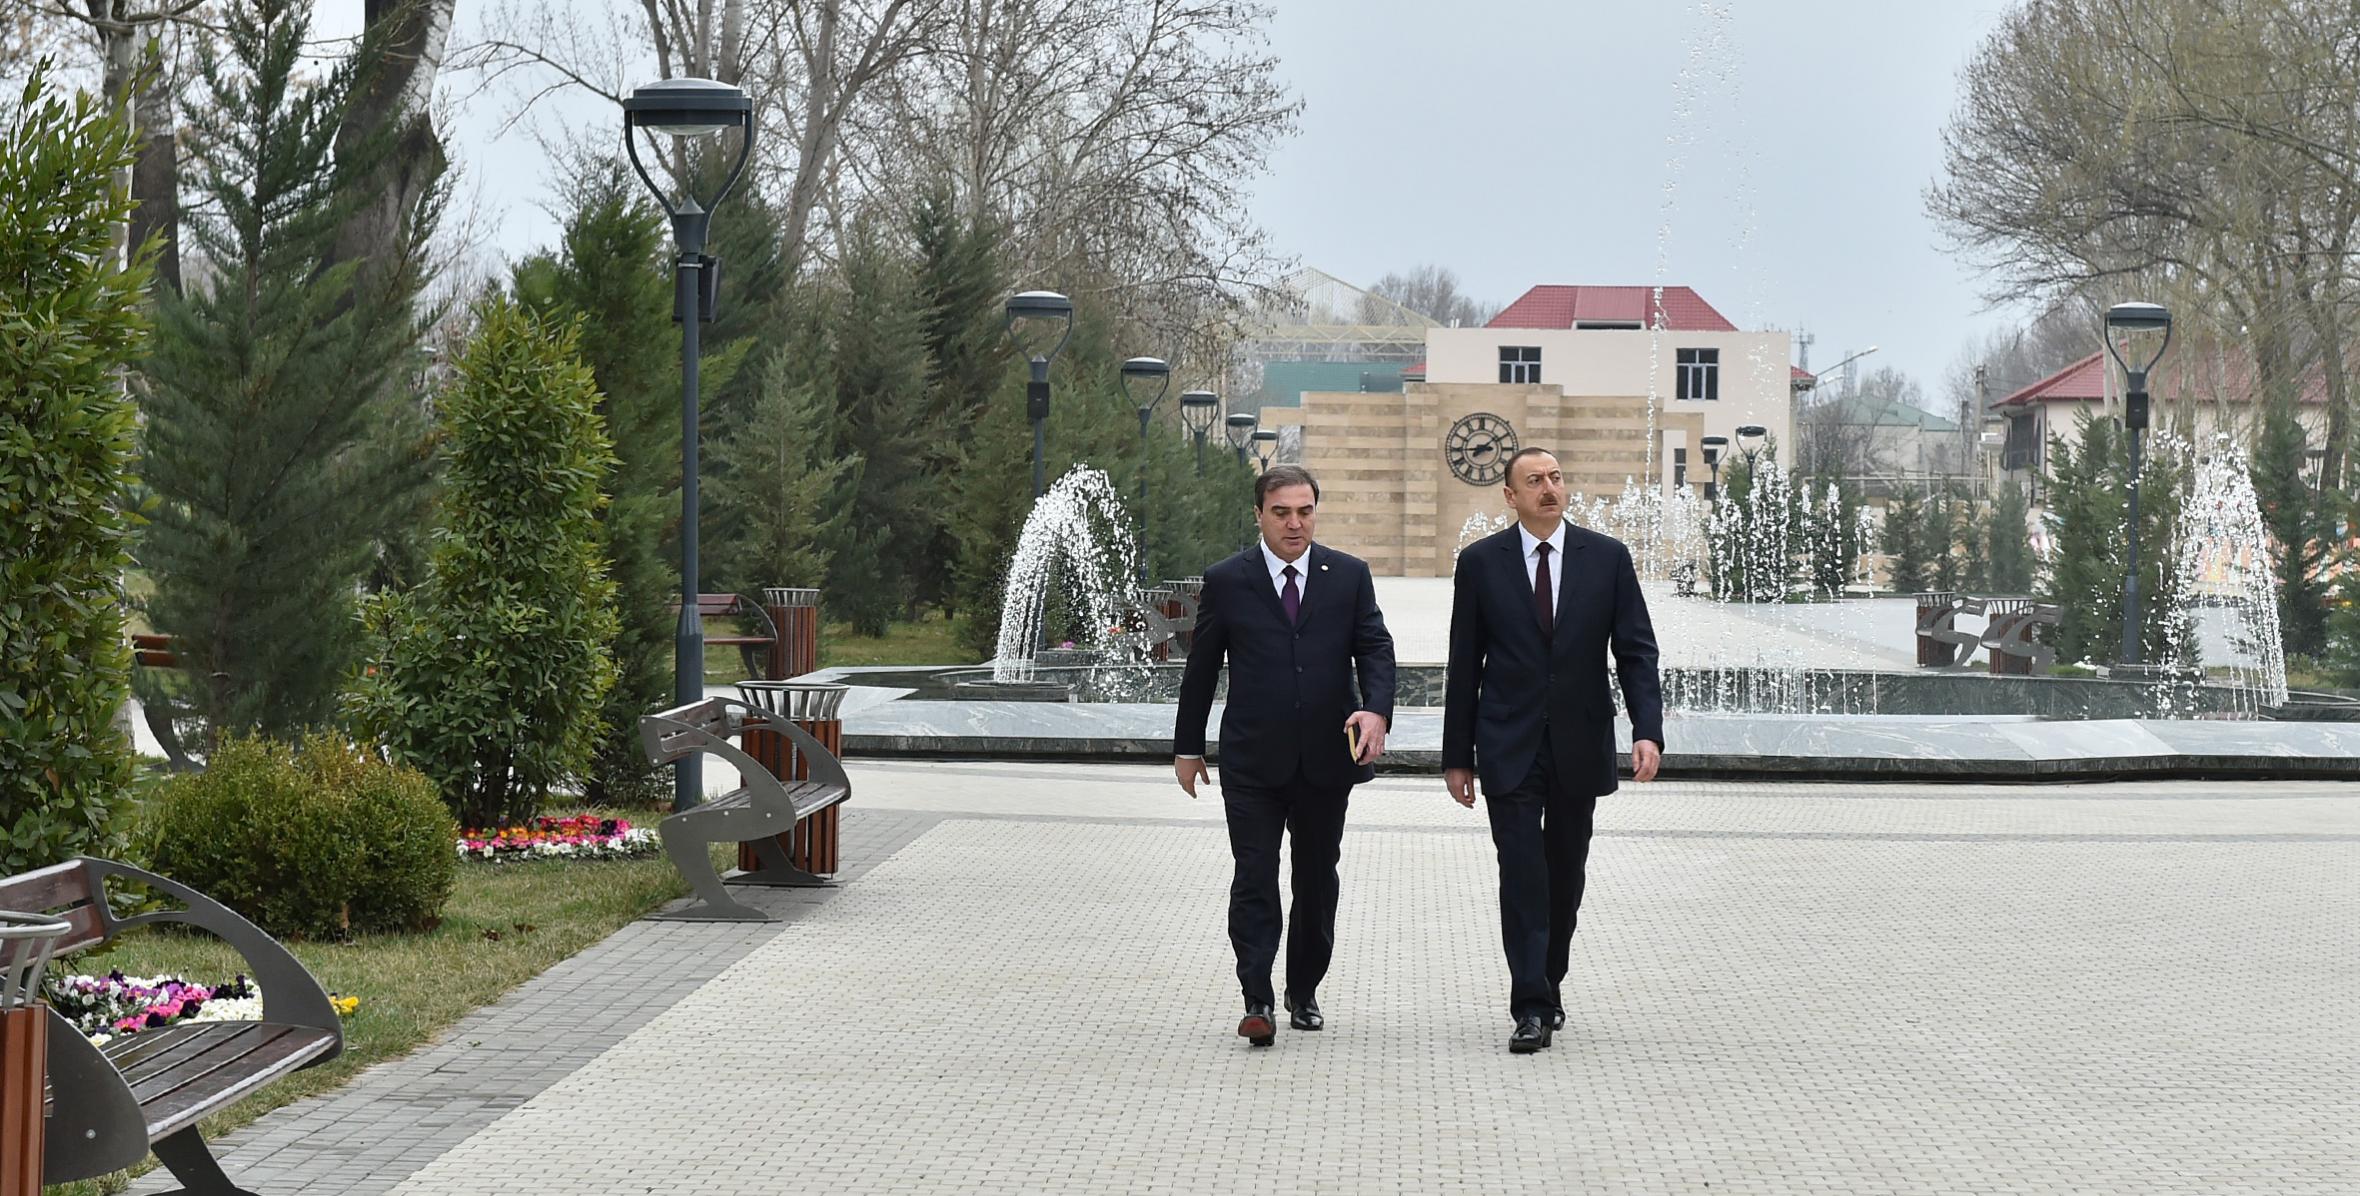 Ilham Aliyev reviewed the conditions created at the Friendship Park in Mingachevir